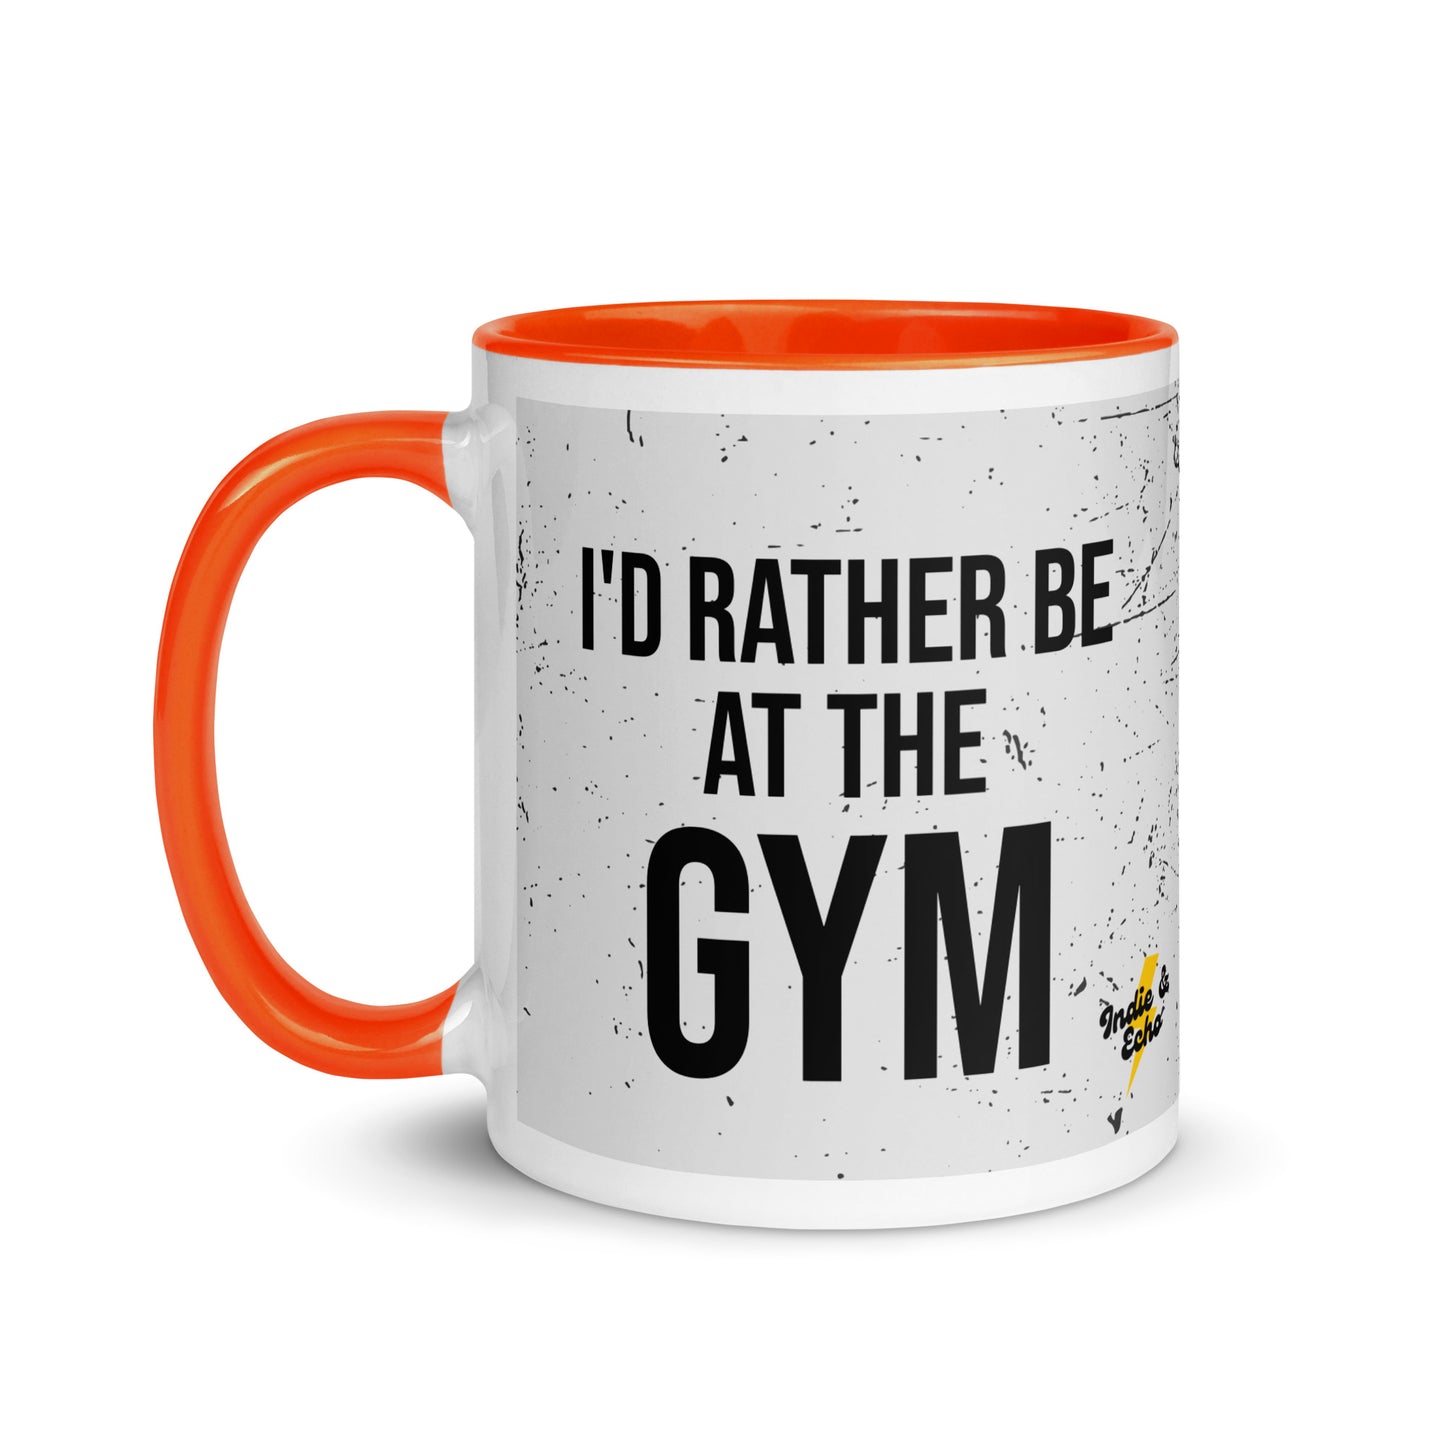 Orange handled mug with I'd rather be at the gym written on it, across a grey splatter background. A gift for someone who loves the gym.